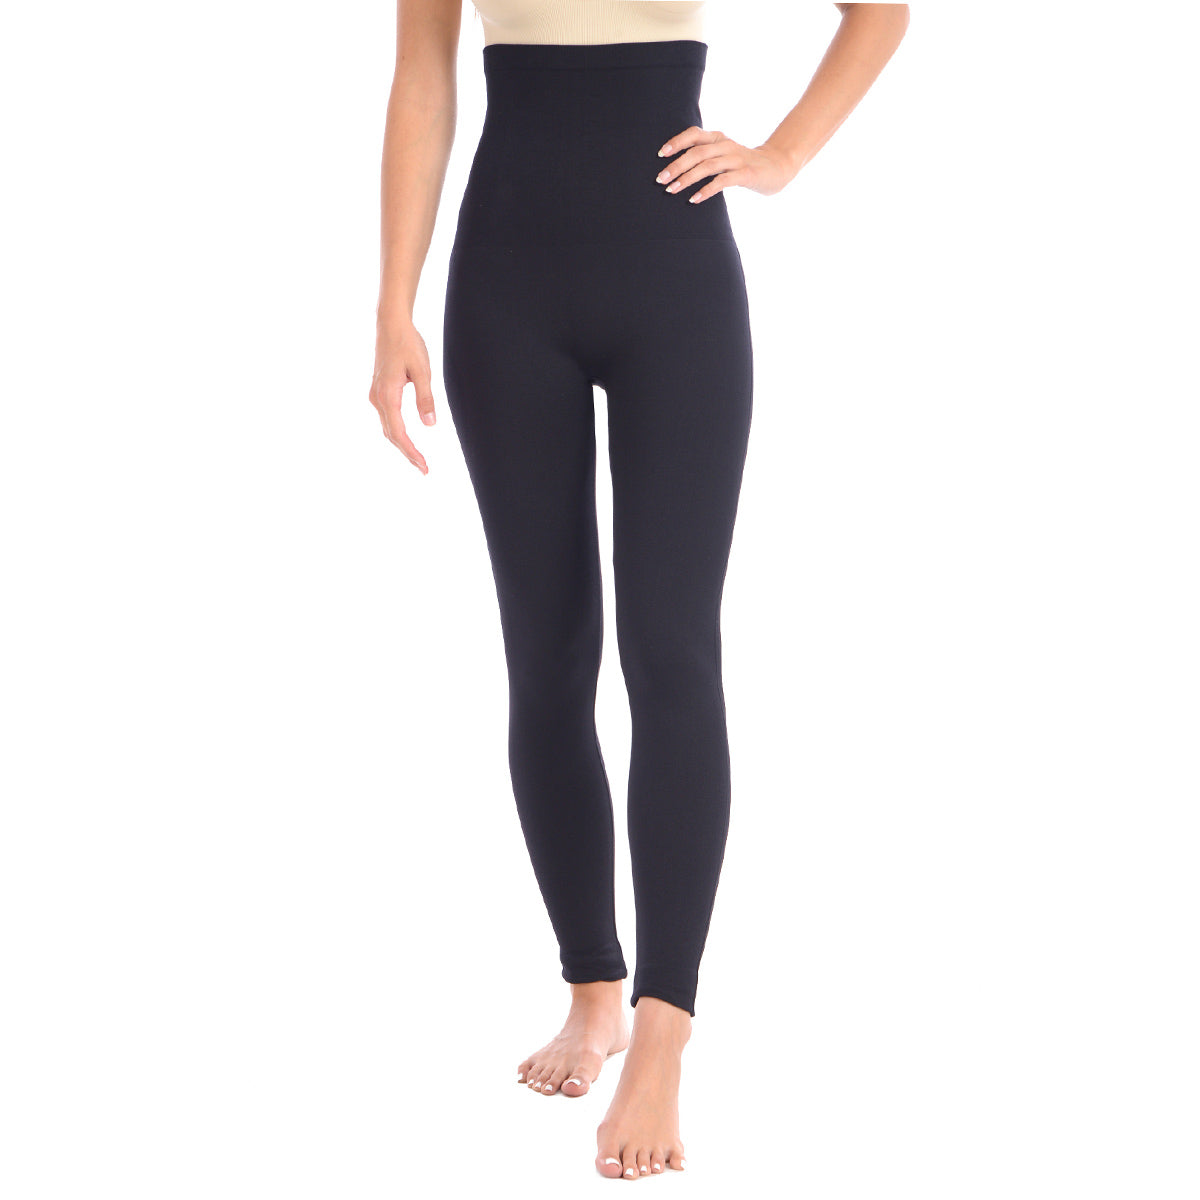 New Full Shaping legging with Double Layer 5 Waistband - Black –